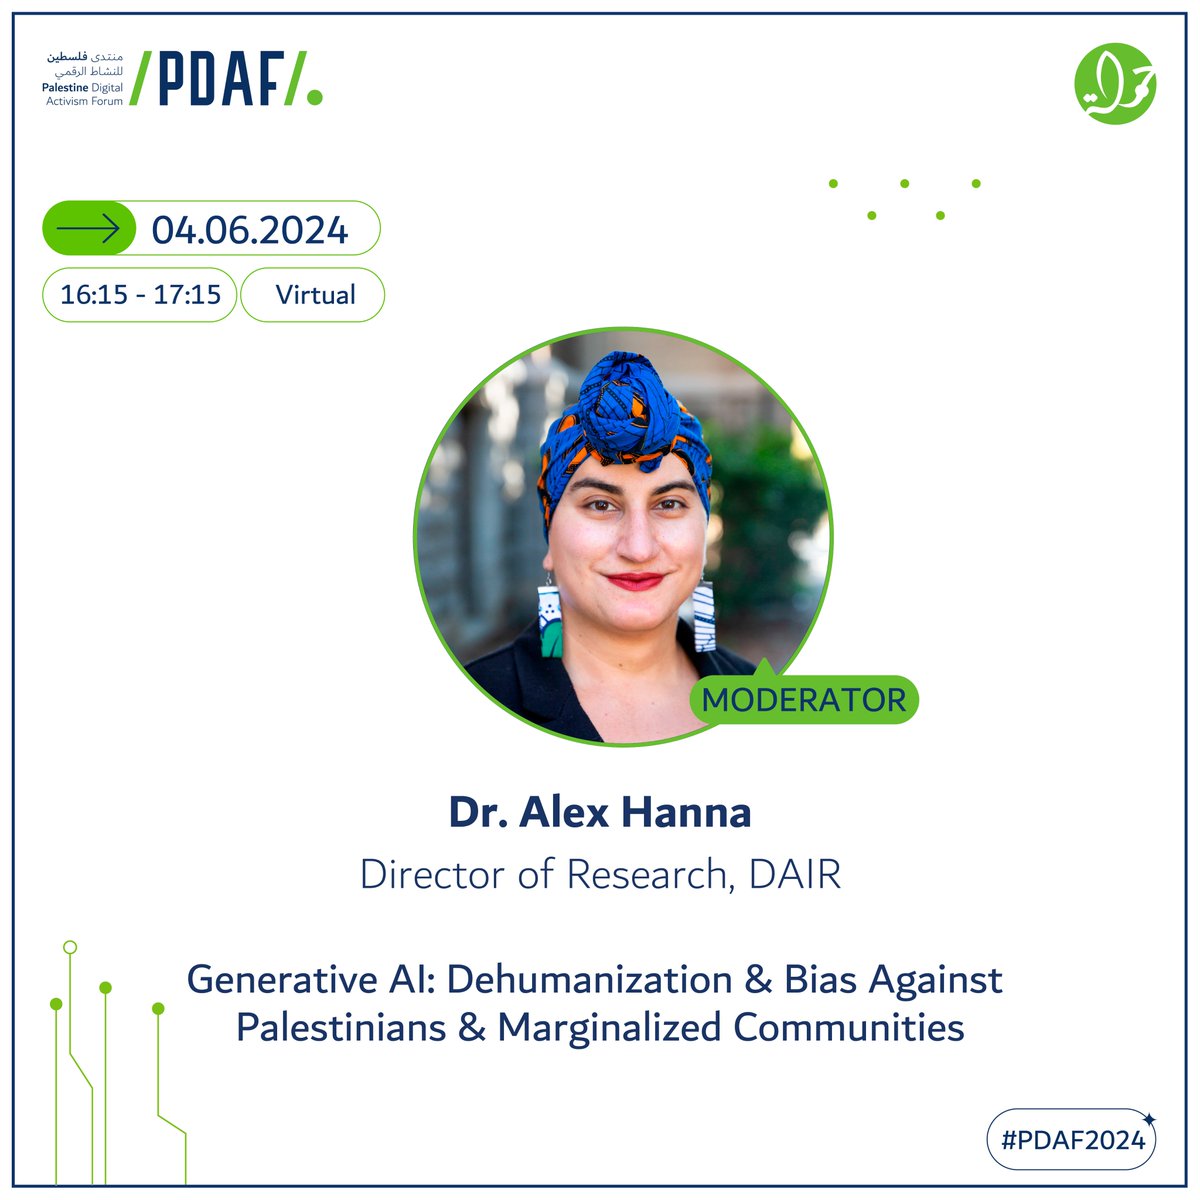 📢Join Dr. @alexhanna , who will moderate the session: “Generative AI: Dehumanization & Bias Against Palestinians & Marginalized Communities” @DAIRInstitute Reserve your seat now: pdaf.net #PDAF2024